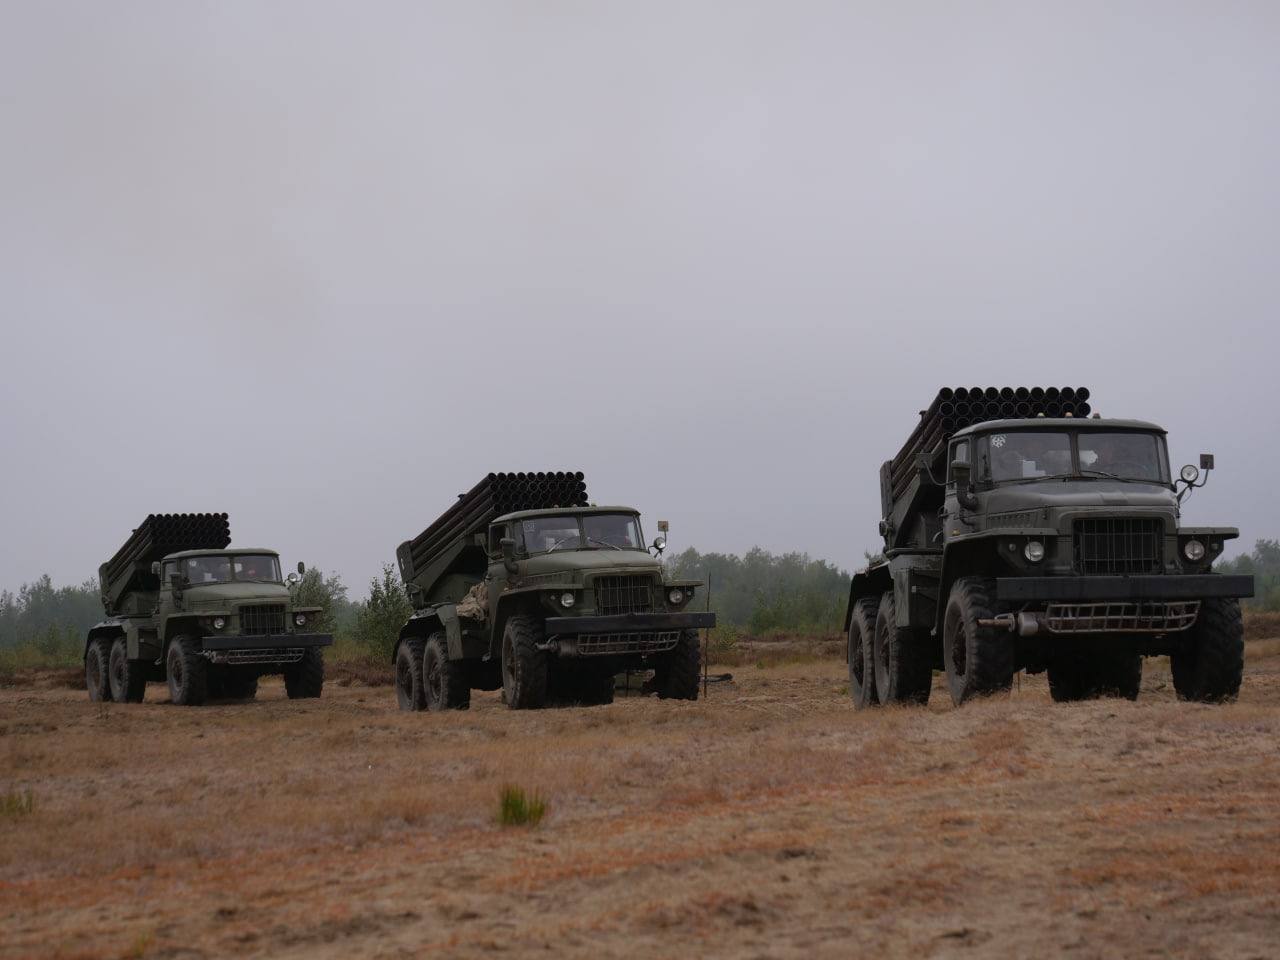 Illustrative photo: BM-21 Grad multiple launch rocket systems of the belarusian army